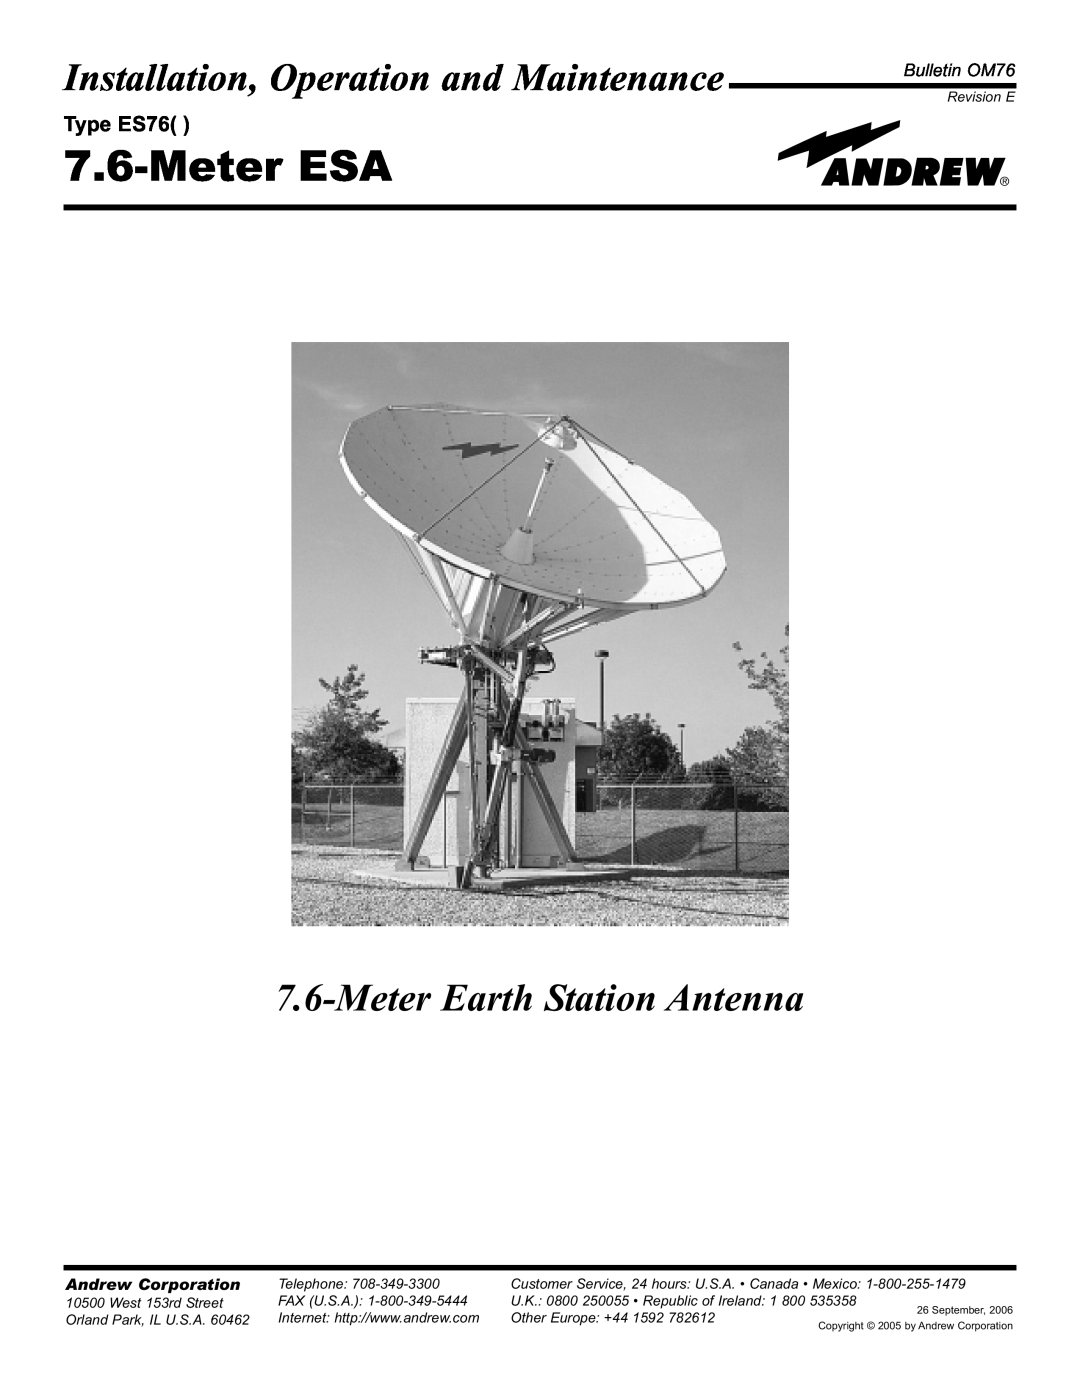 Andrew 7.6-Meter ESA manual Type ES76, Installation, Operation and Maintenance, Meter Earth Station Antenna, Bulletin OM76 